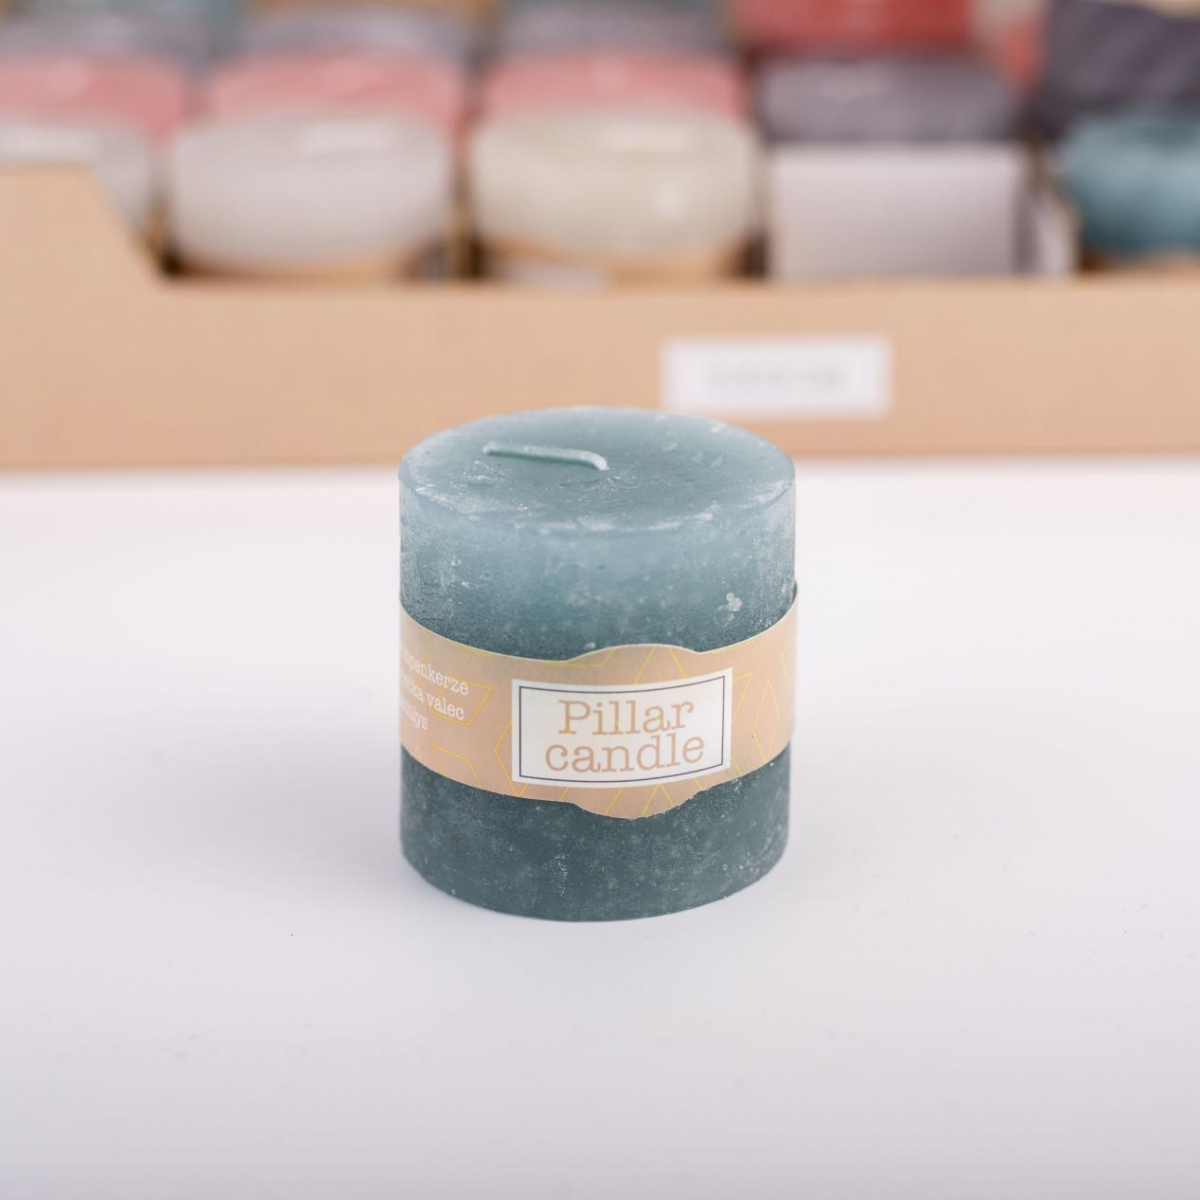 Pillar Candles : Colorful Roman Column , Retro Frosted Craft ,Display Box ,Set 24 ,China Factory ,Cheapest Price-HOWCANDLE-Candles,Scented Candles,Aromatherapy Candles,Soy Candles,Vegan Candles,Jar Candles,Pillar Candles,Candle Gift Sets,Essential Oils,Reed Diffuser,Candle Holder,